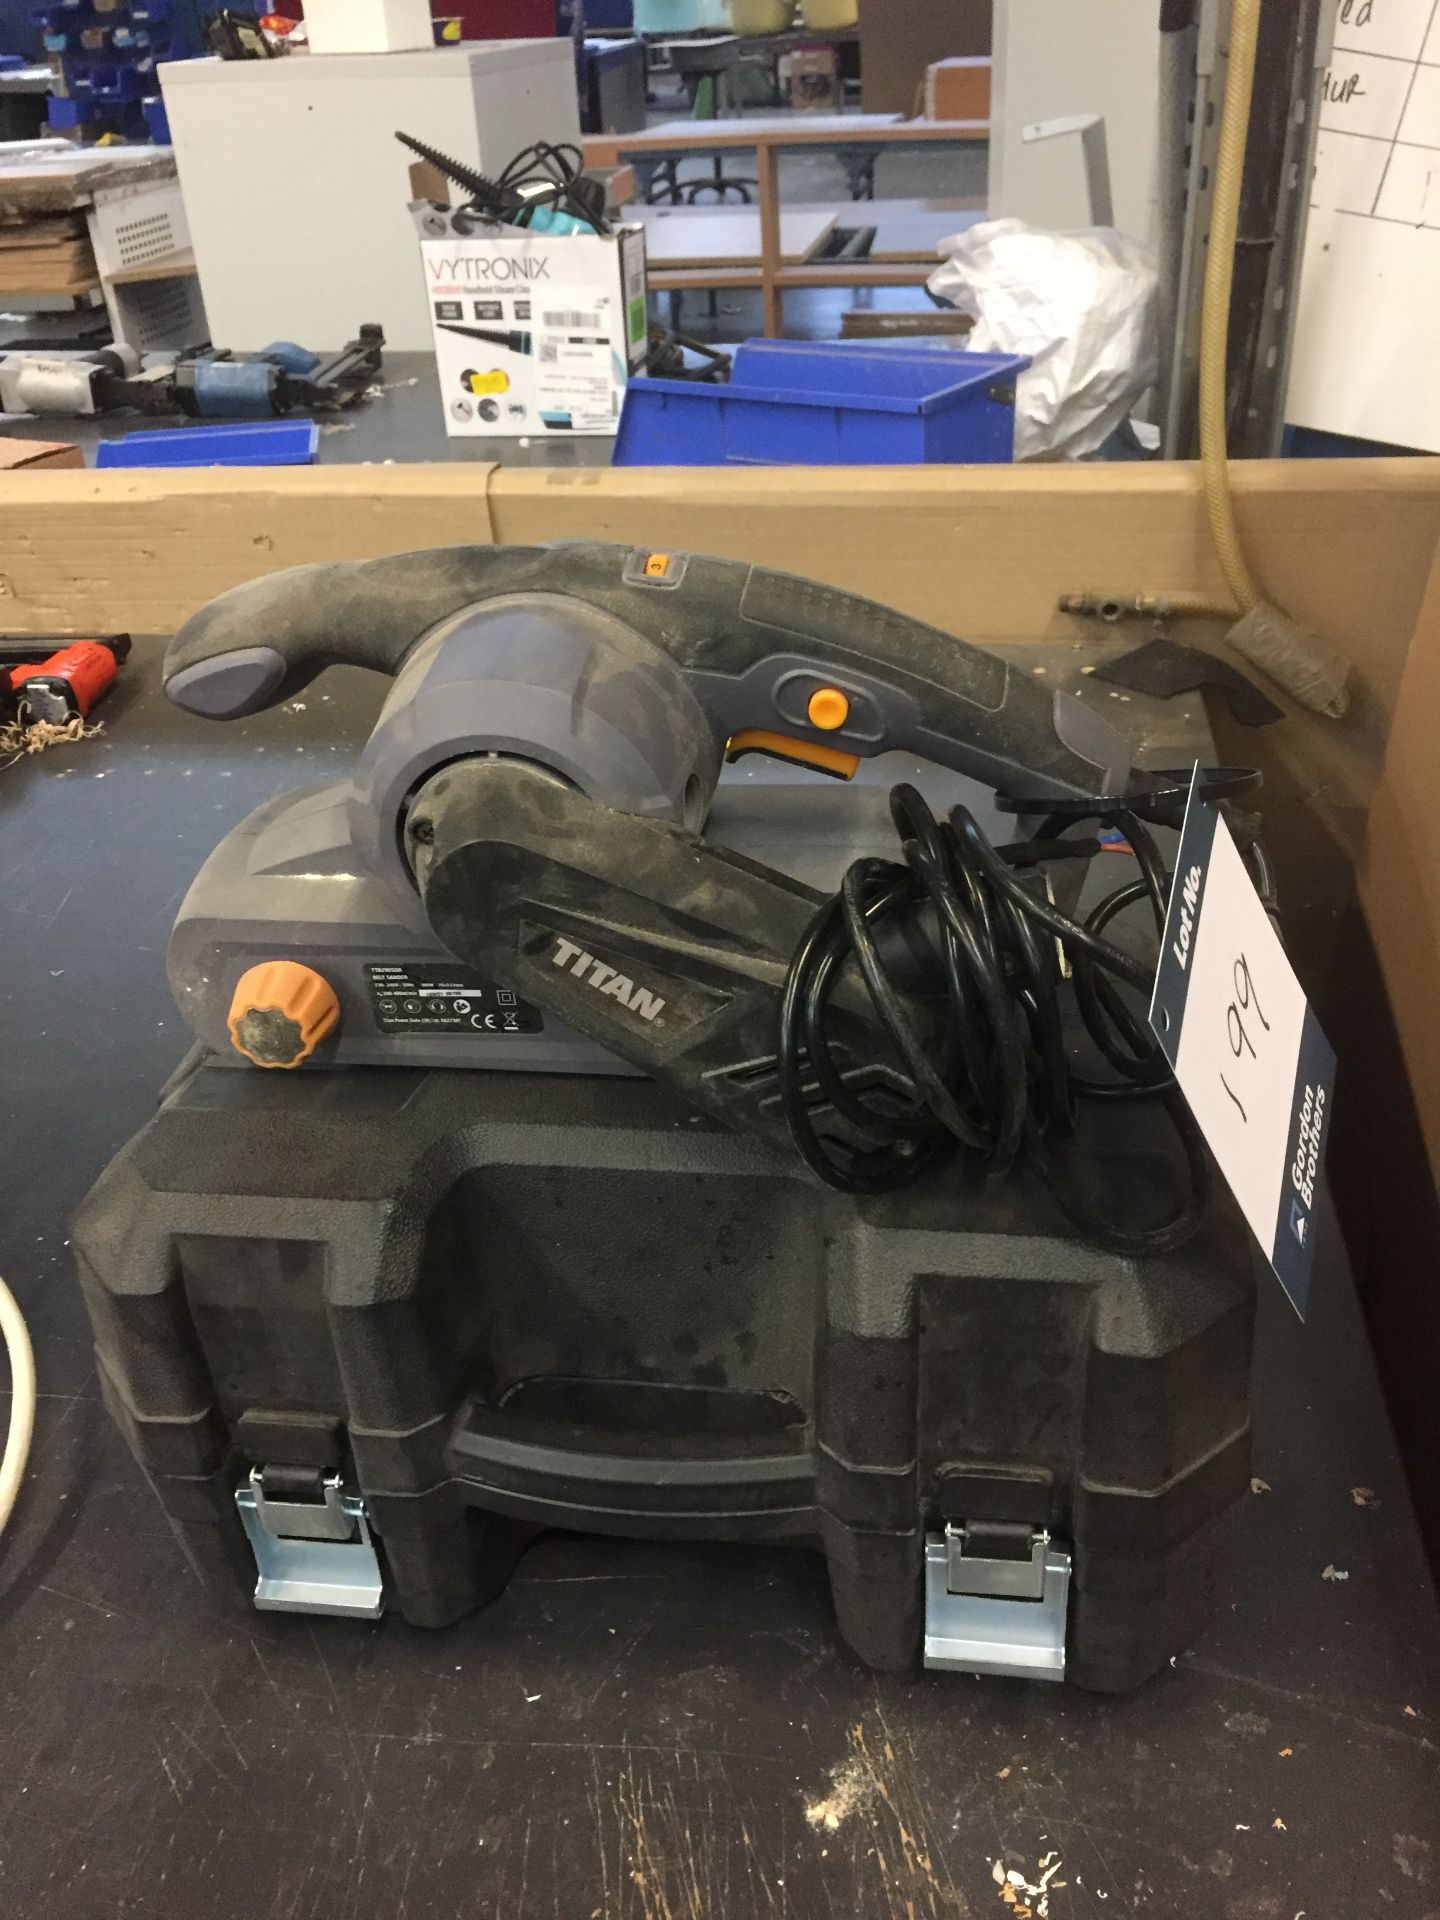 Titan TTB 290 SDR hand held belt sander and case (240v) ** This lot is located at The Dowlais